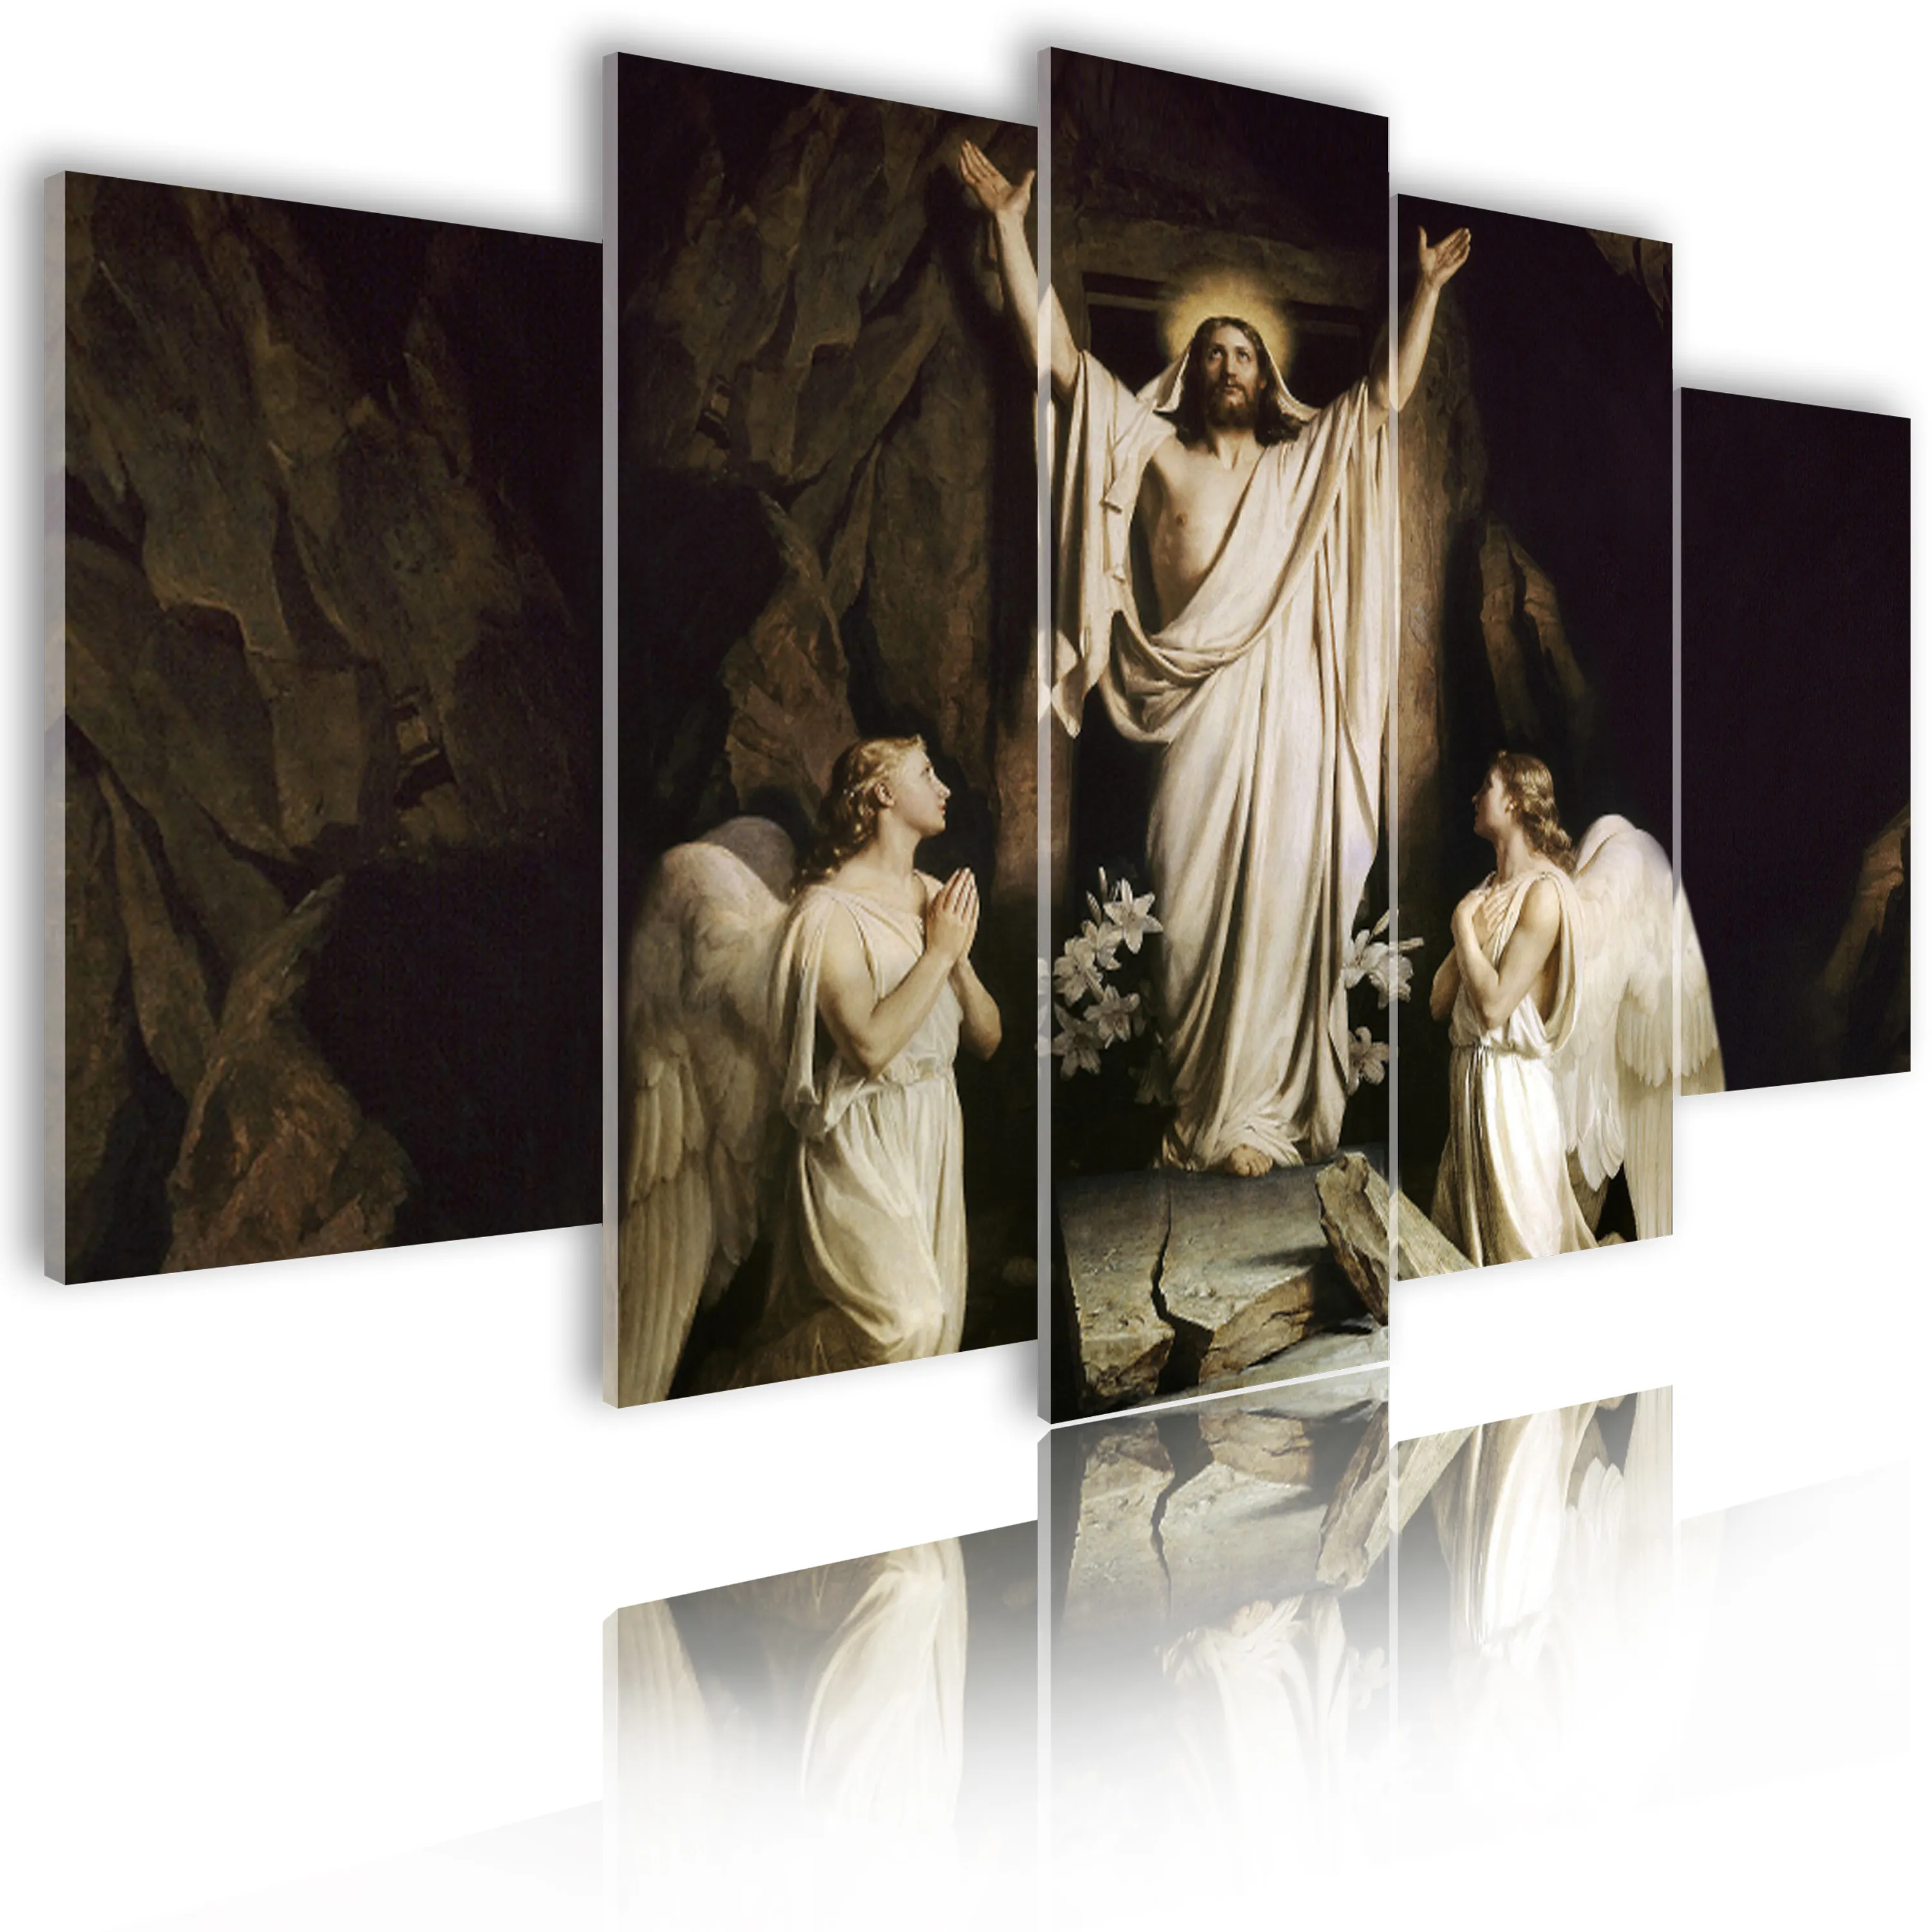 5 Panel Canvas Painting Decorative Wall Art Painting Home Decor Nordic Posters and Prints Picture Portrait Jesus Poster 2021